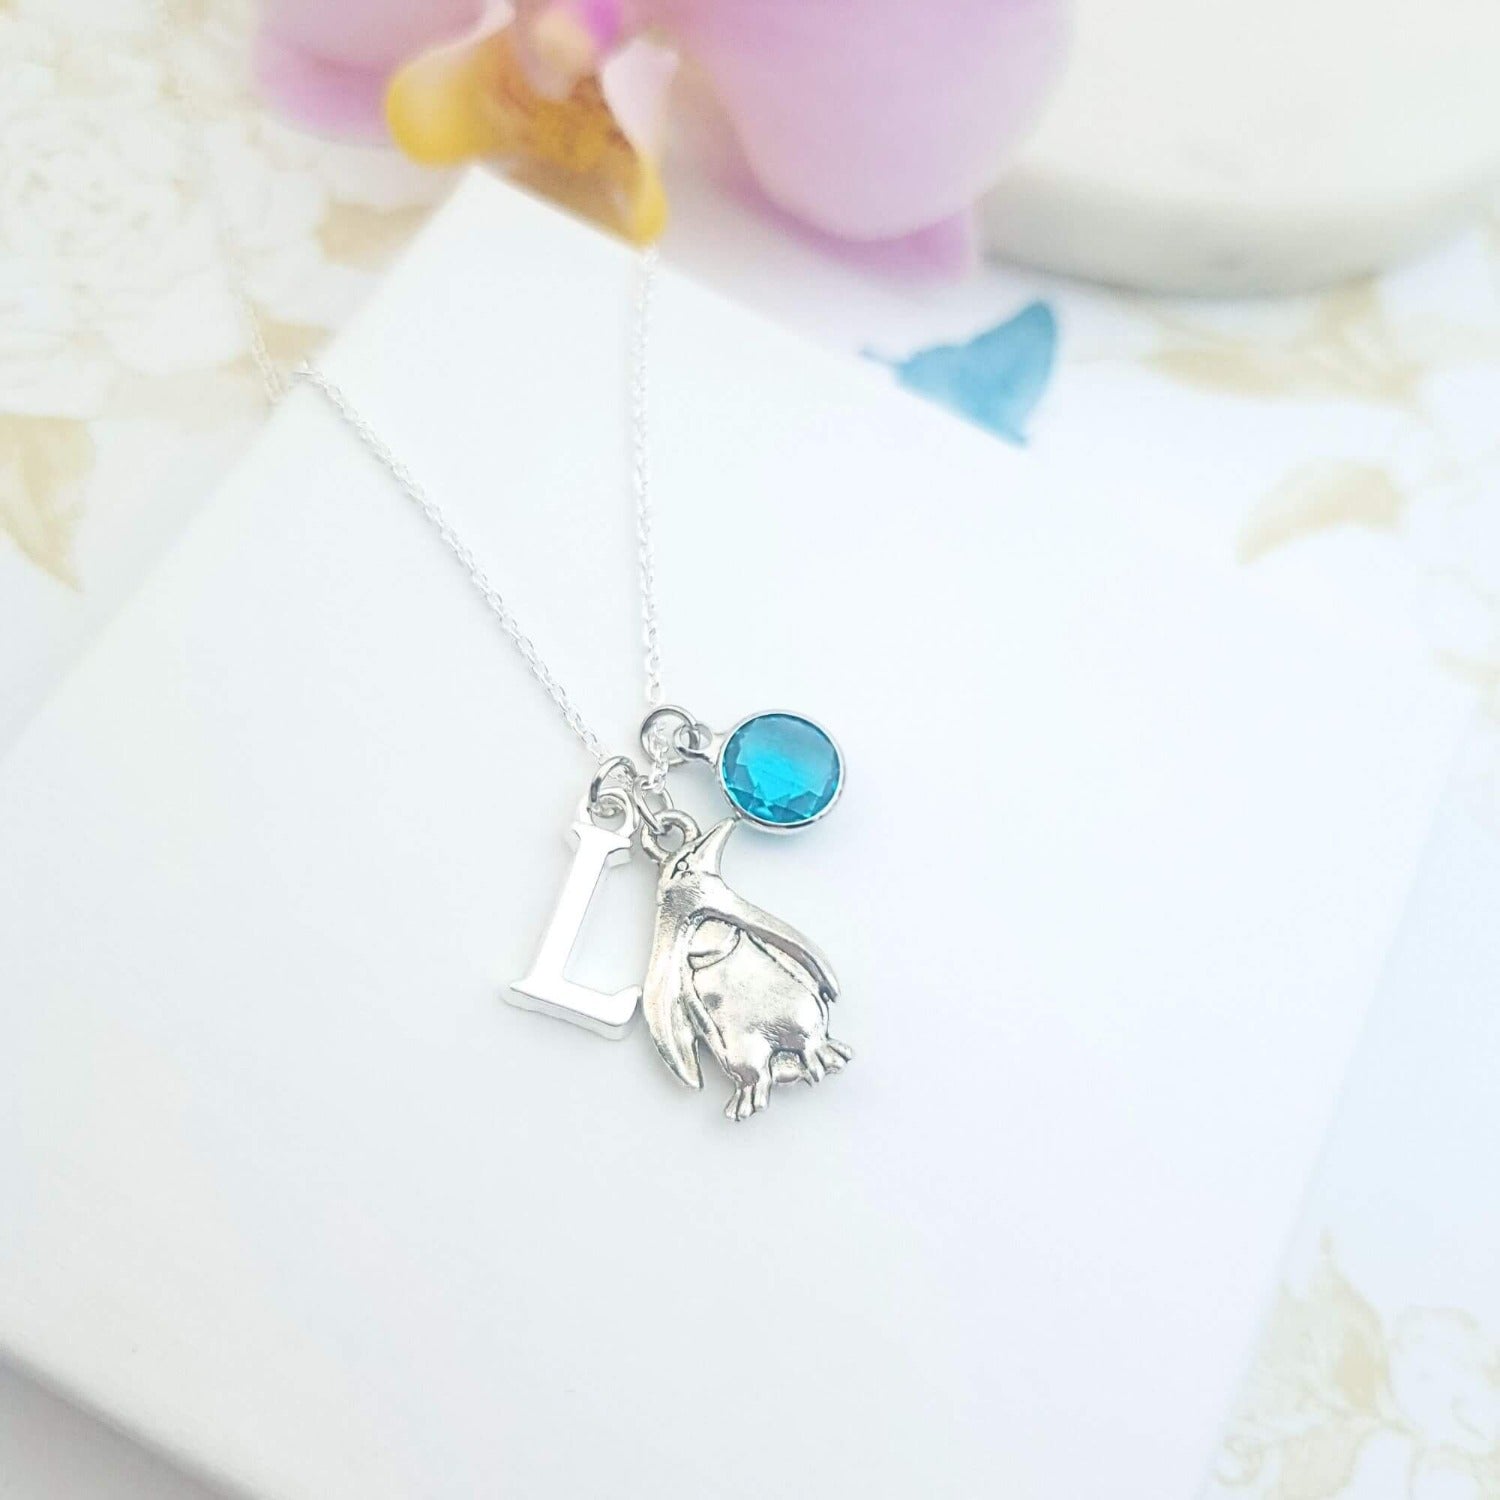 personalised penguin necklace sterling silver